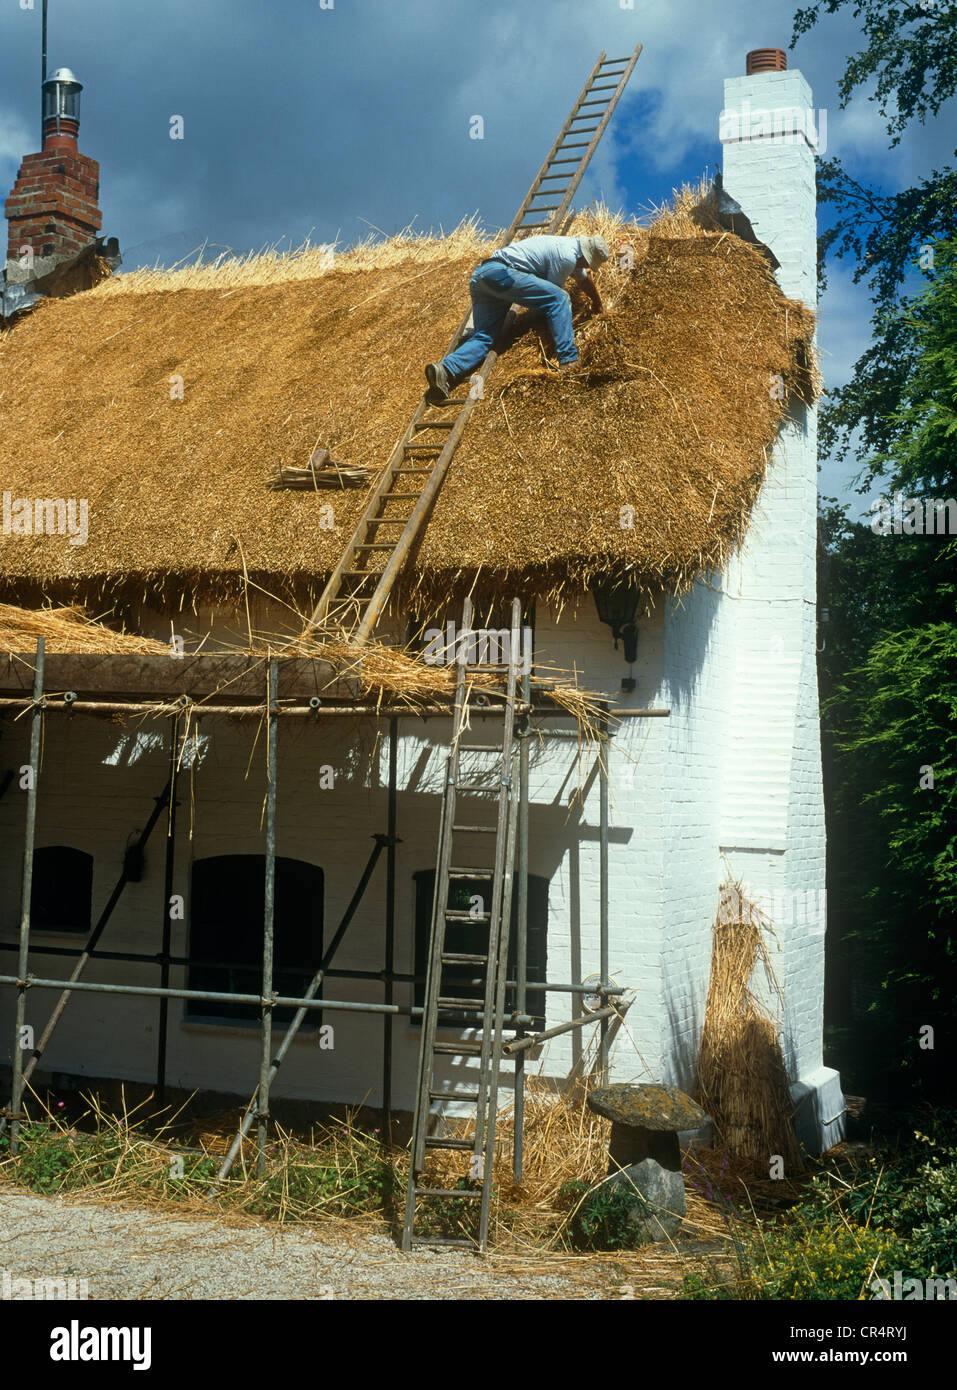 Thatched roof house being repaired Stock Photo